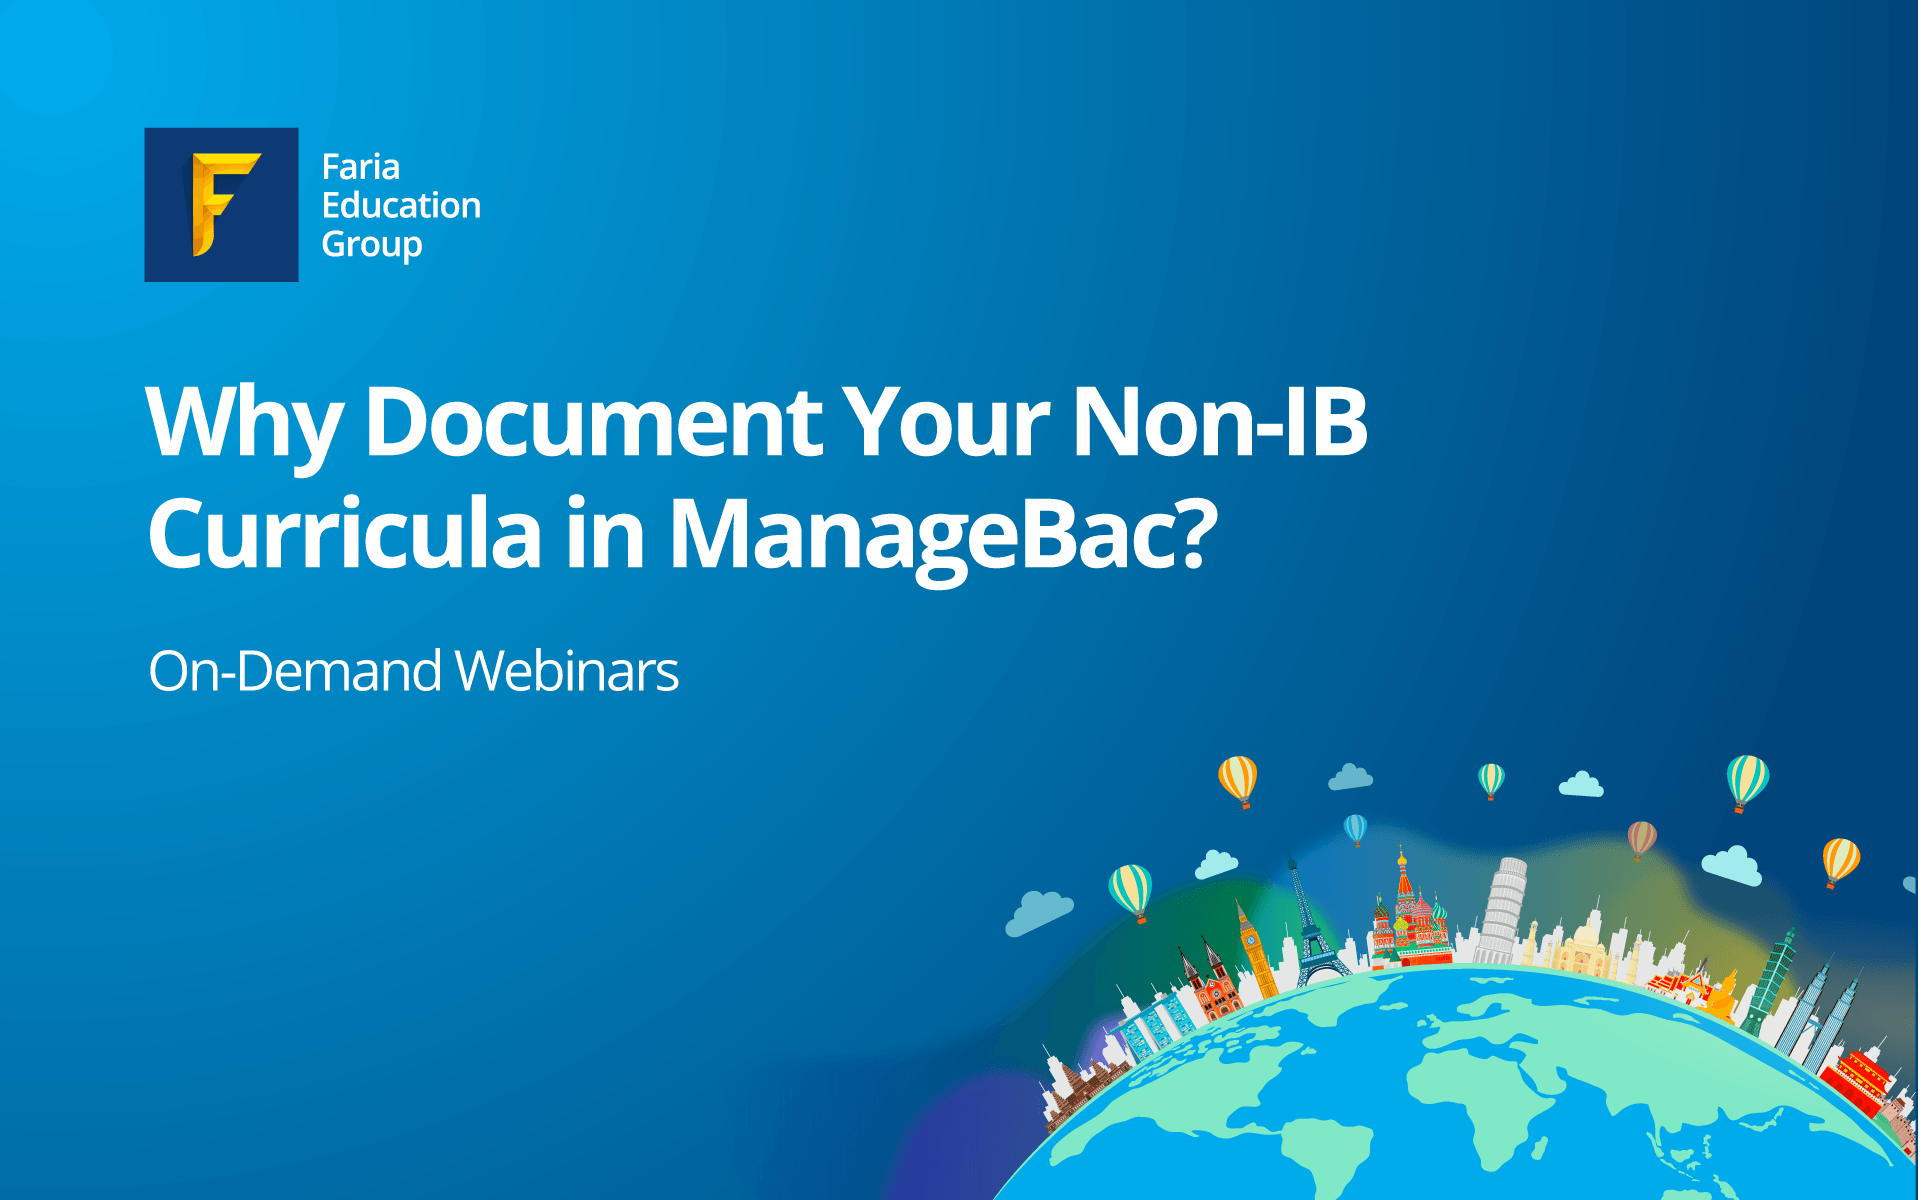 Why document your non-IB curricula in ManageBac?